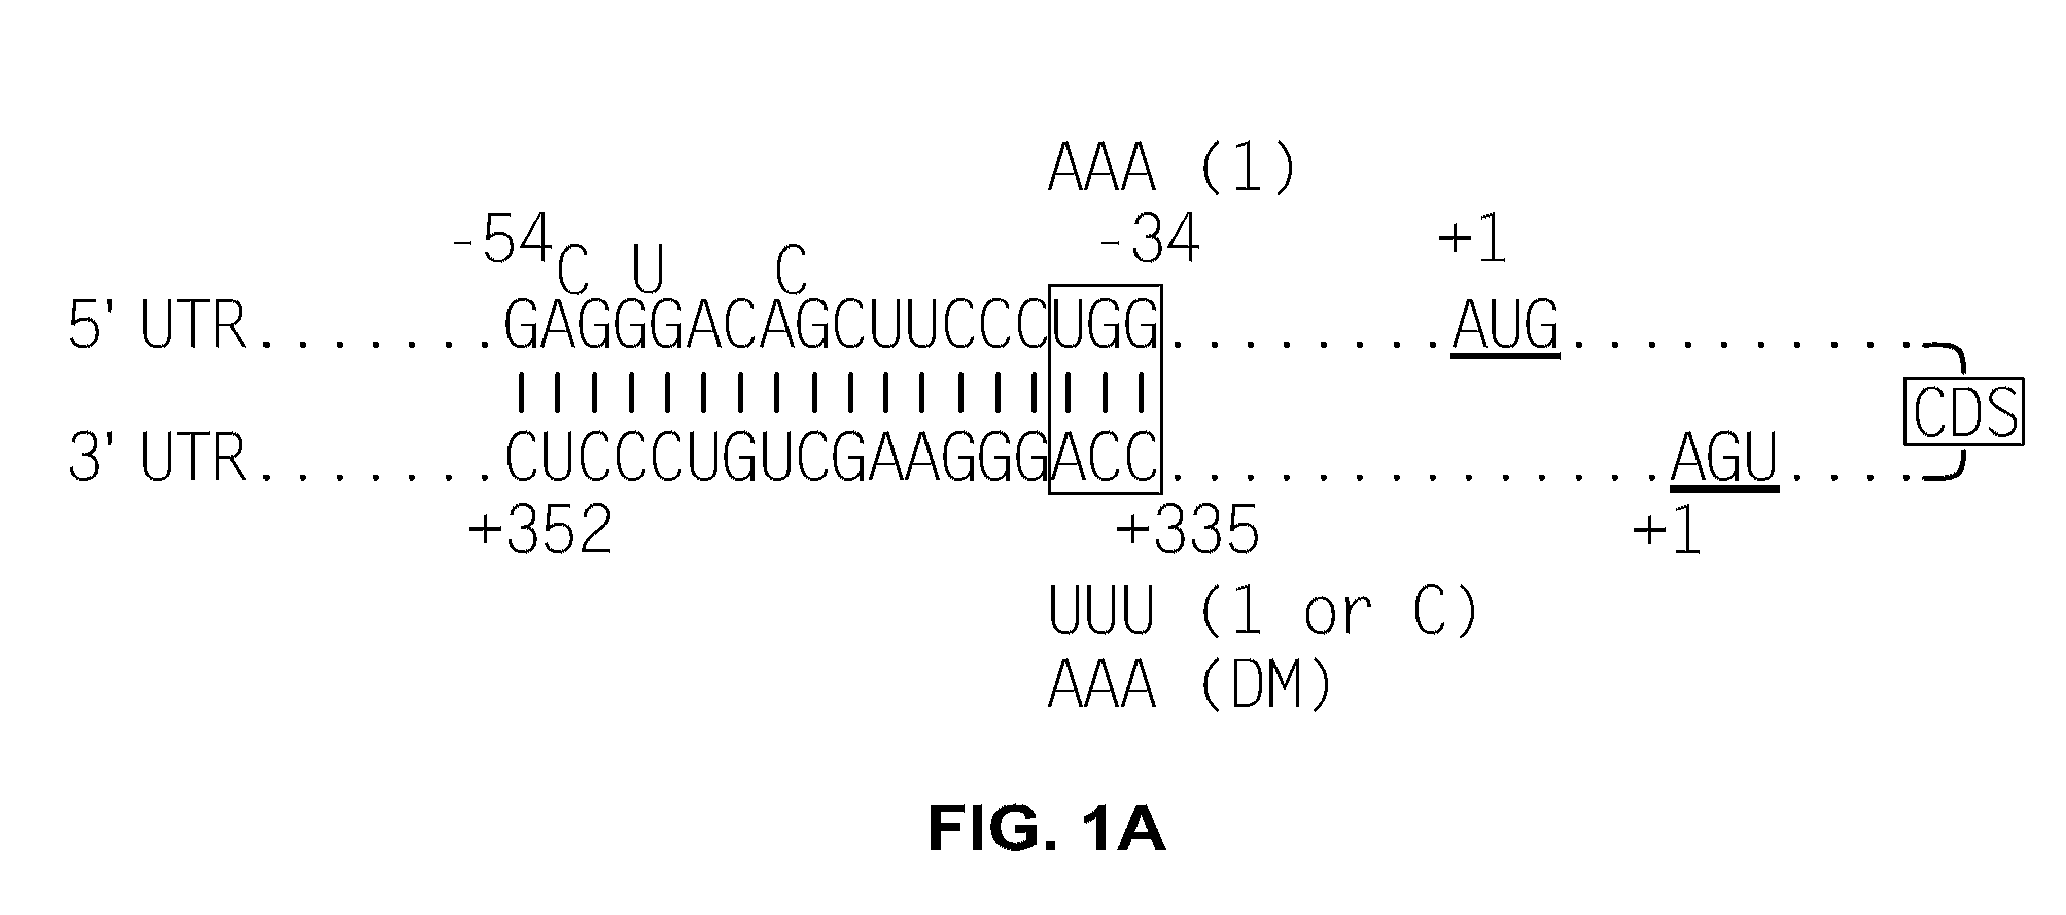 Oligonucleotides which inhibit p53 induction in response to cellular stress